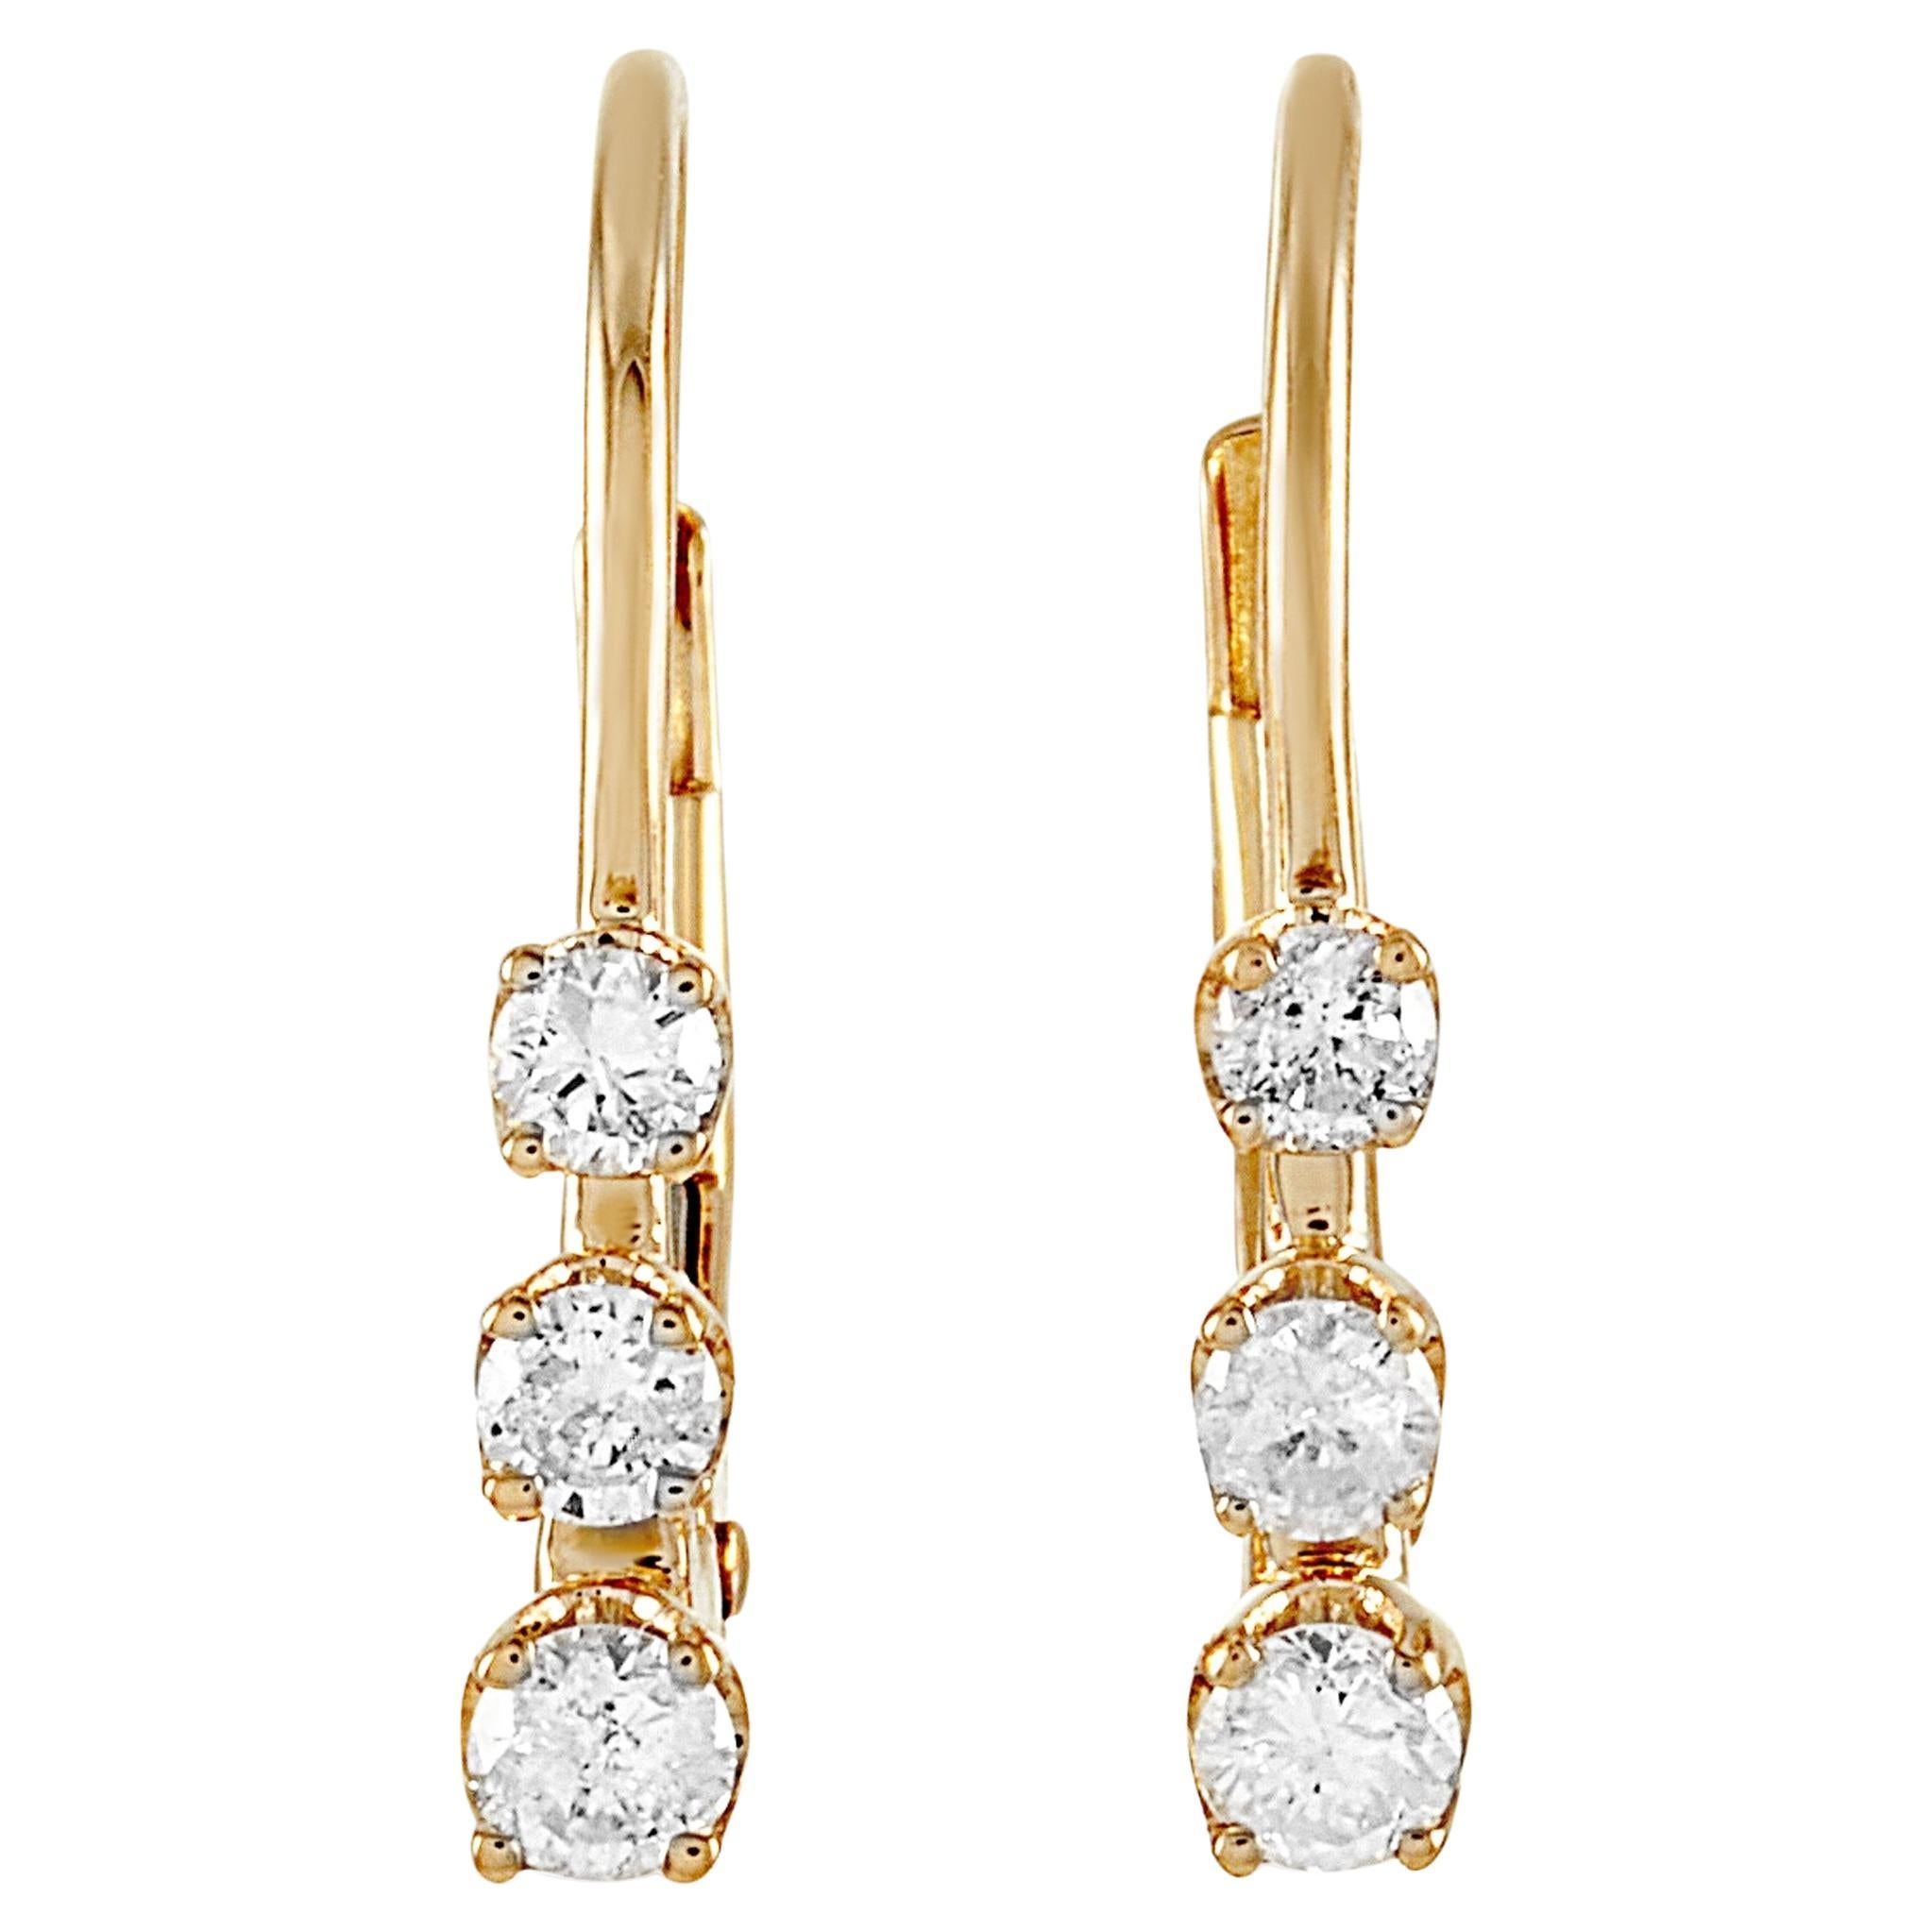 LB Exclusive 14K Yellow Gold 0.25 Ct Diamond Earrings For Sale